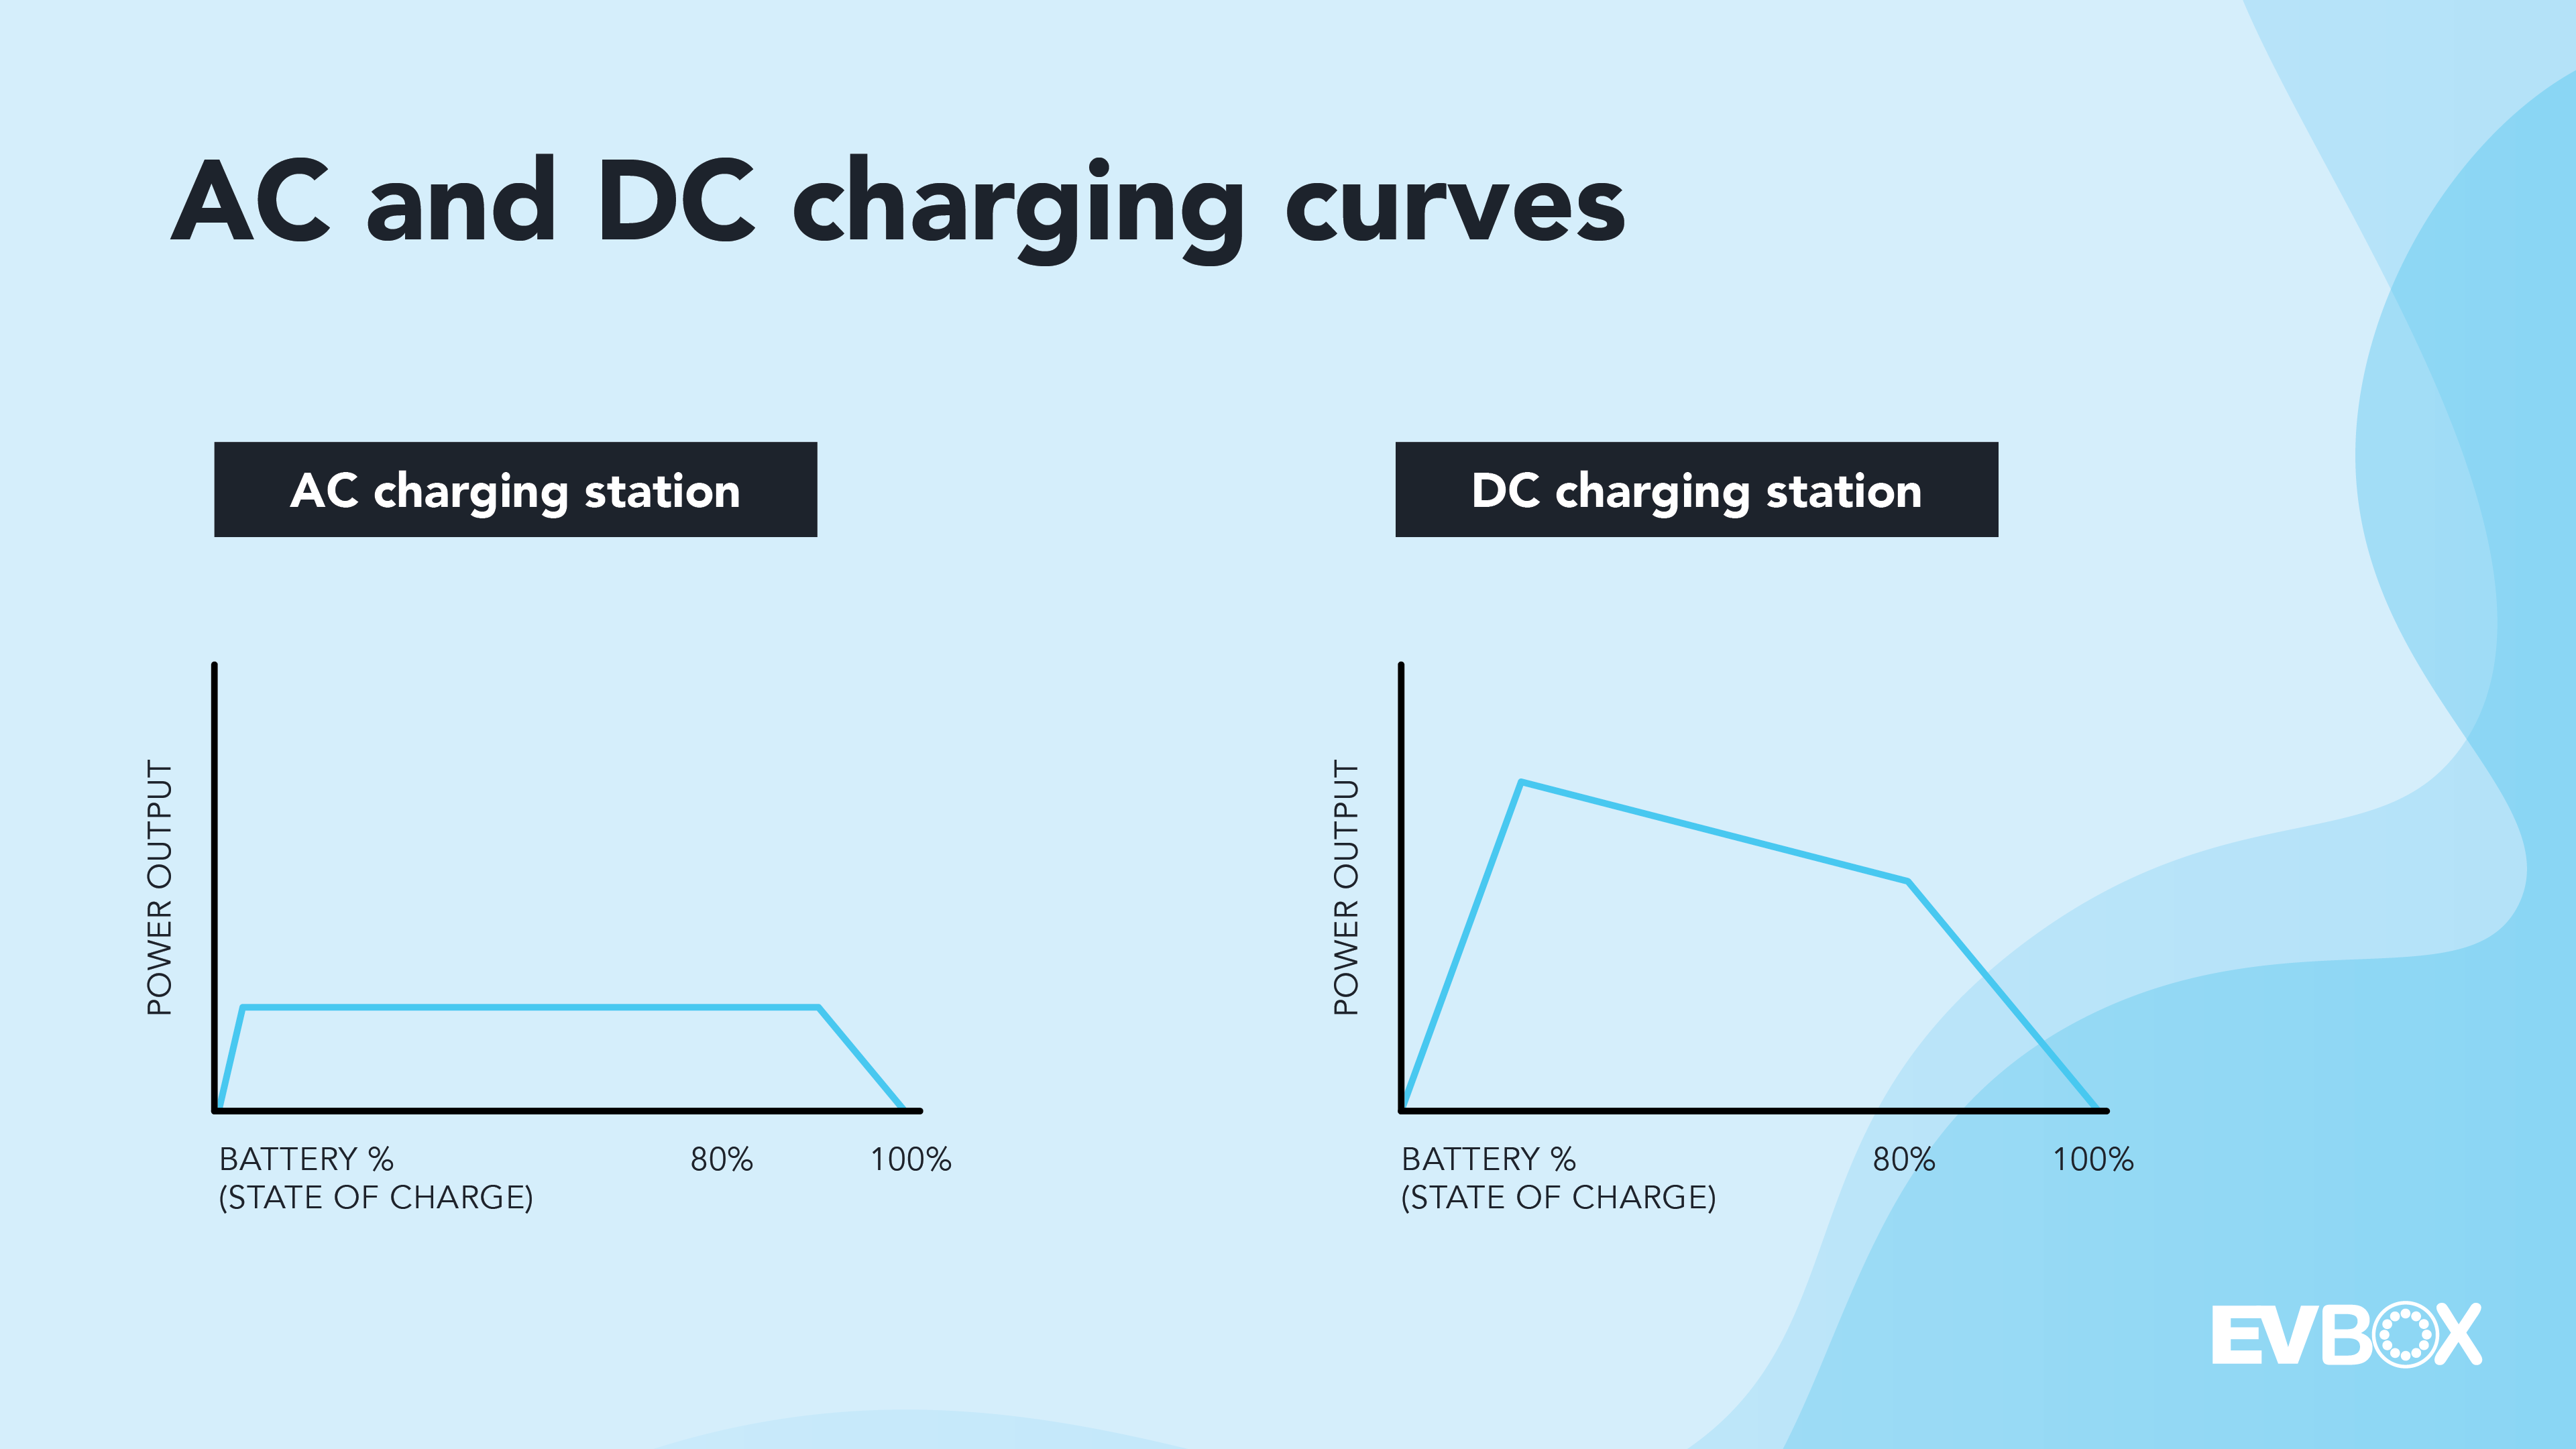 AC and DC charging curves